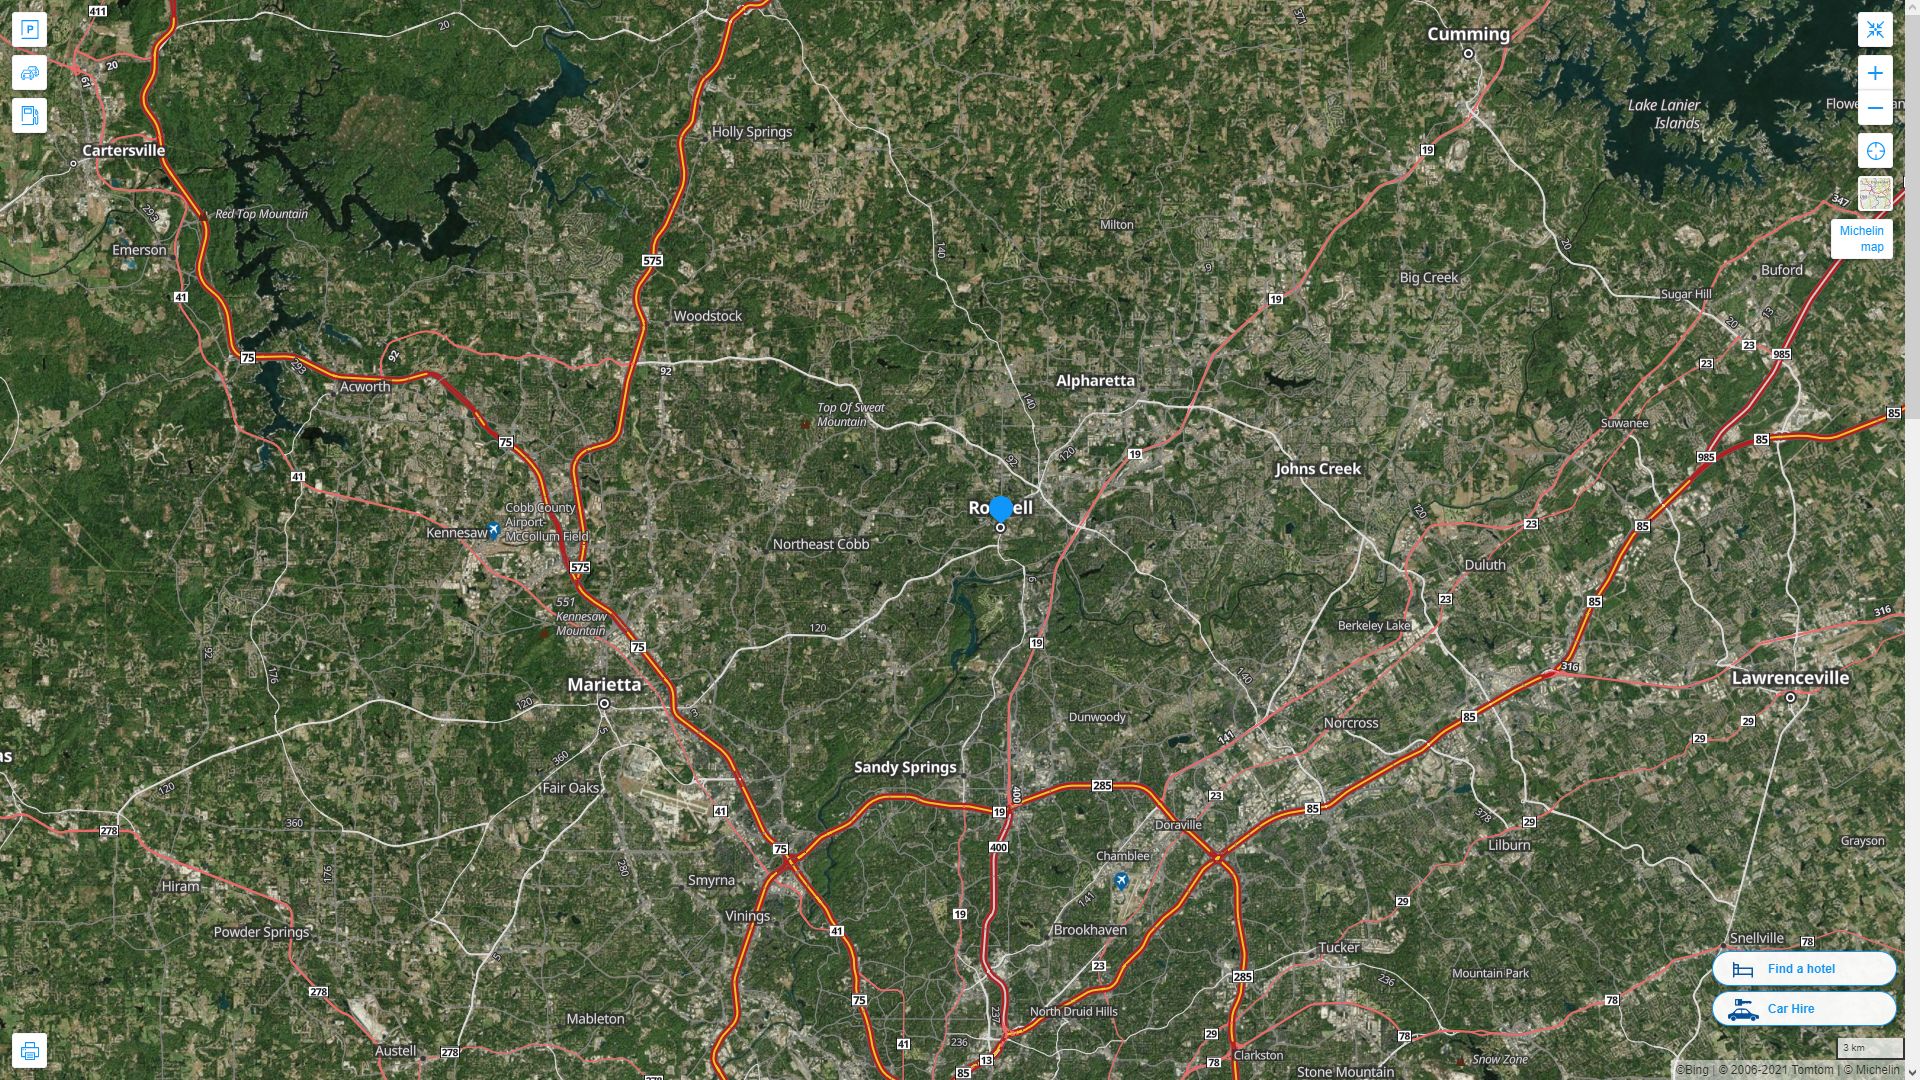 Roswell Georgia Highway and Road Map with Satellite View